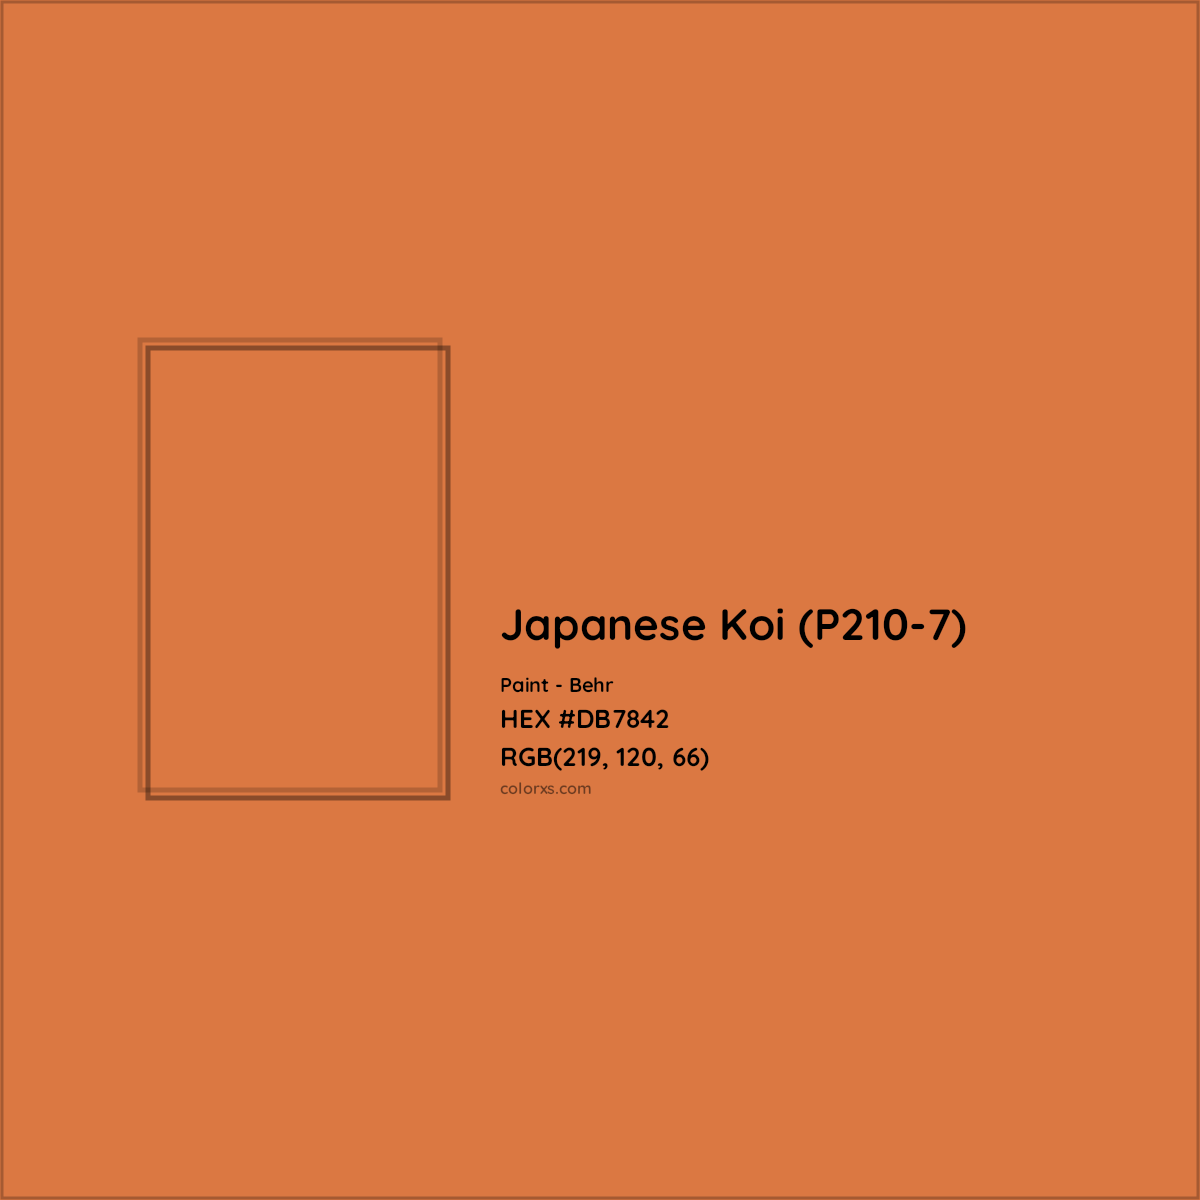 HEX #DB7842 Japanese Koi (P210-7) Paint Behr - Color Code